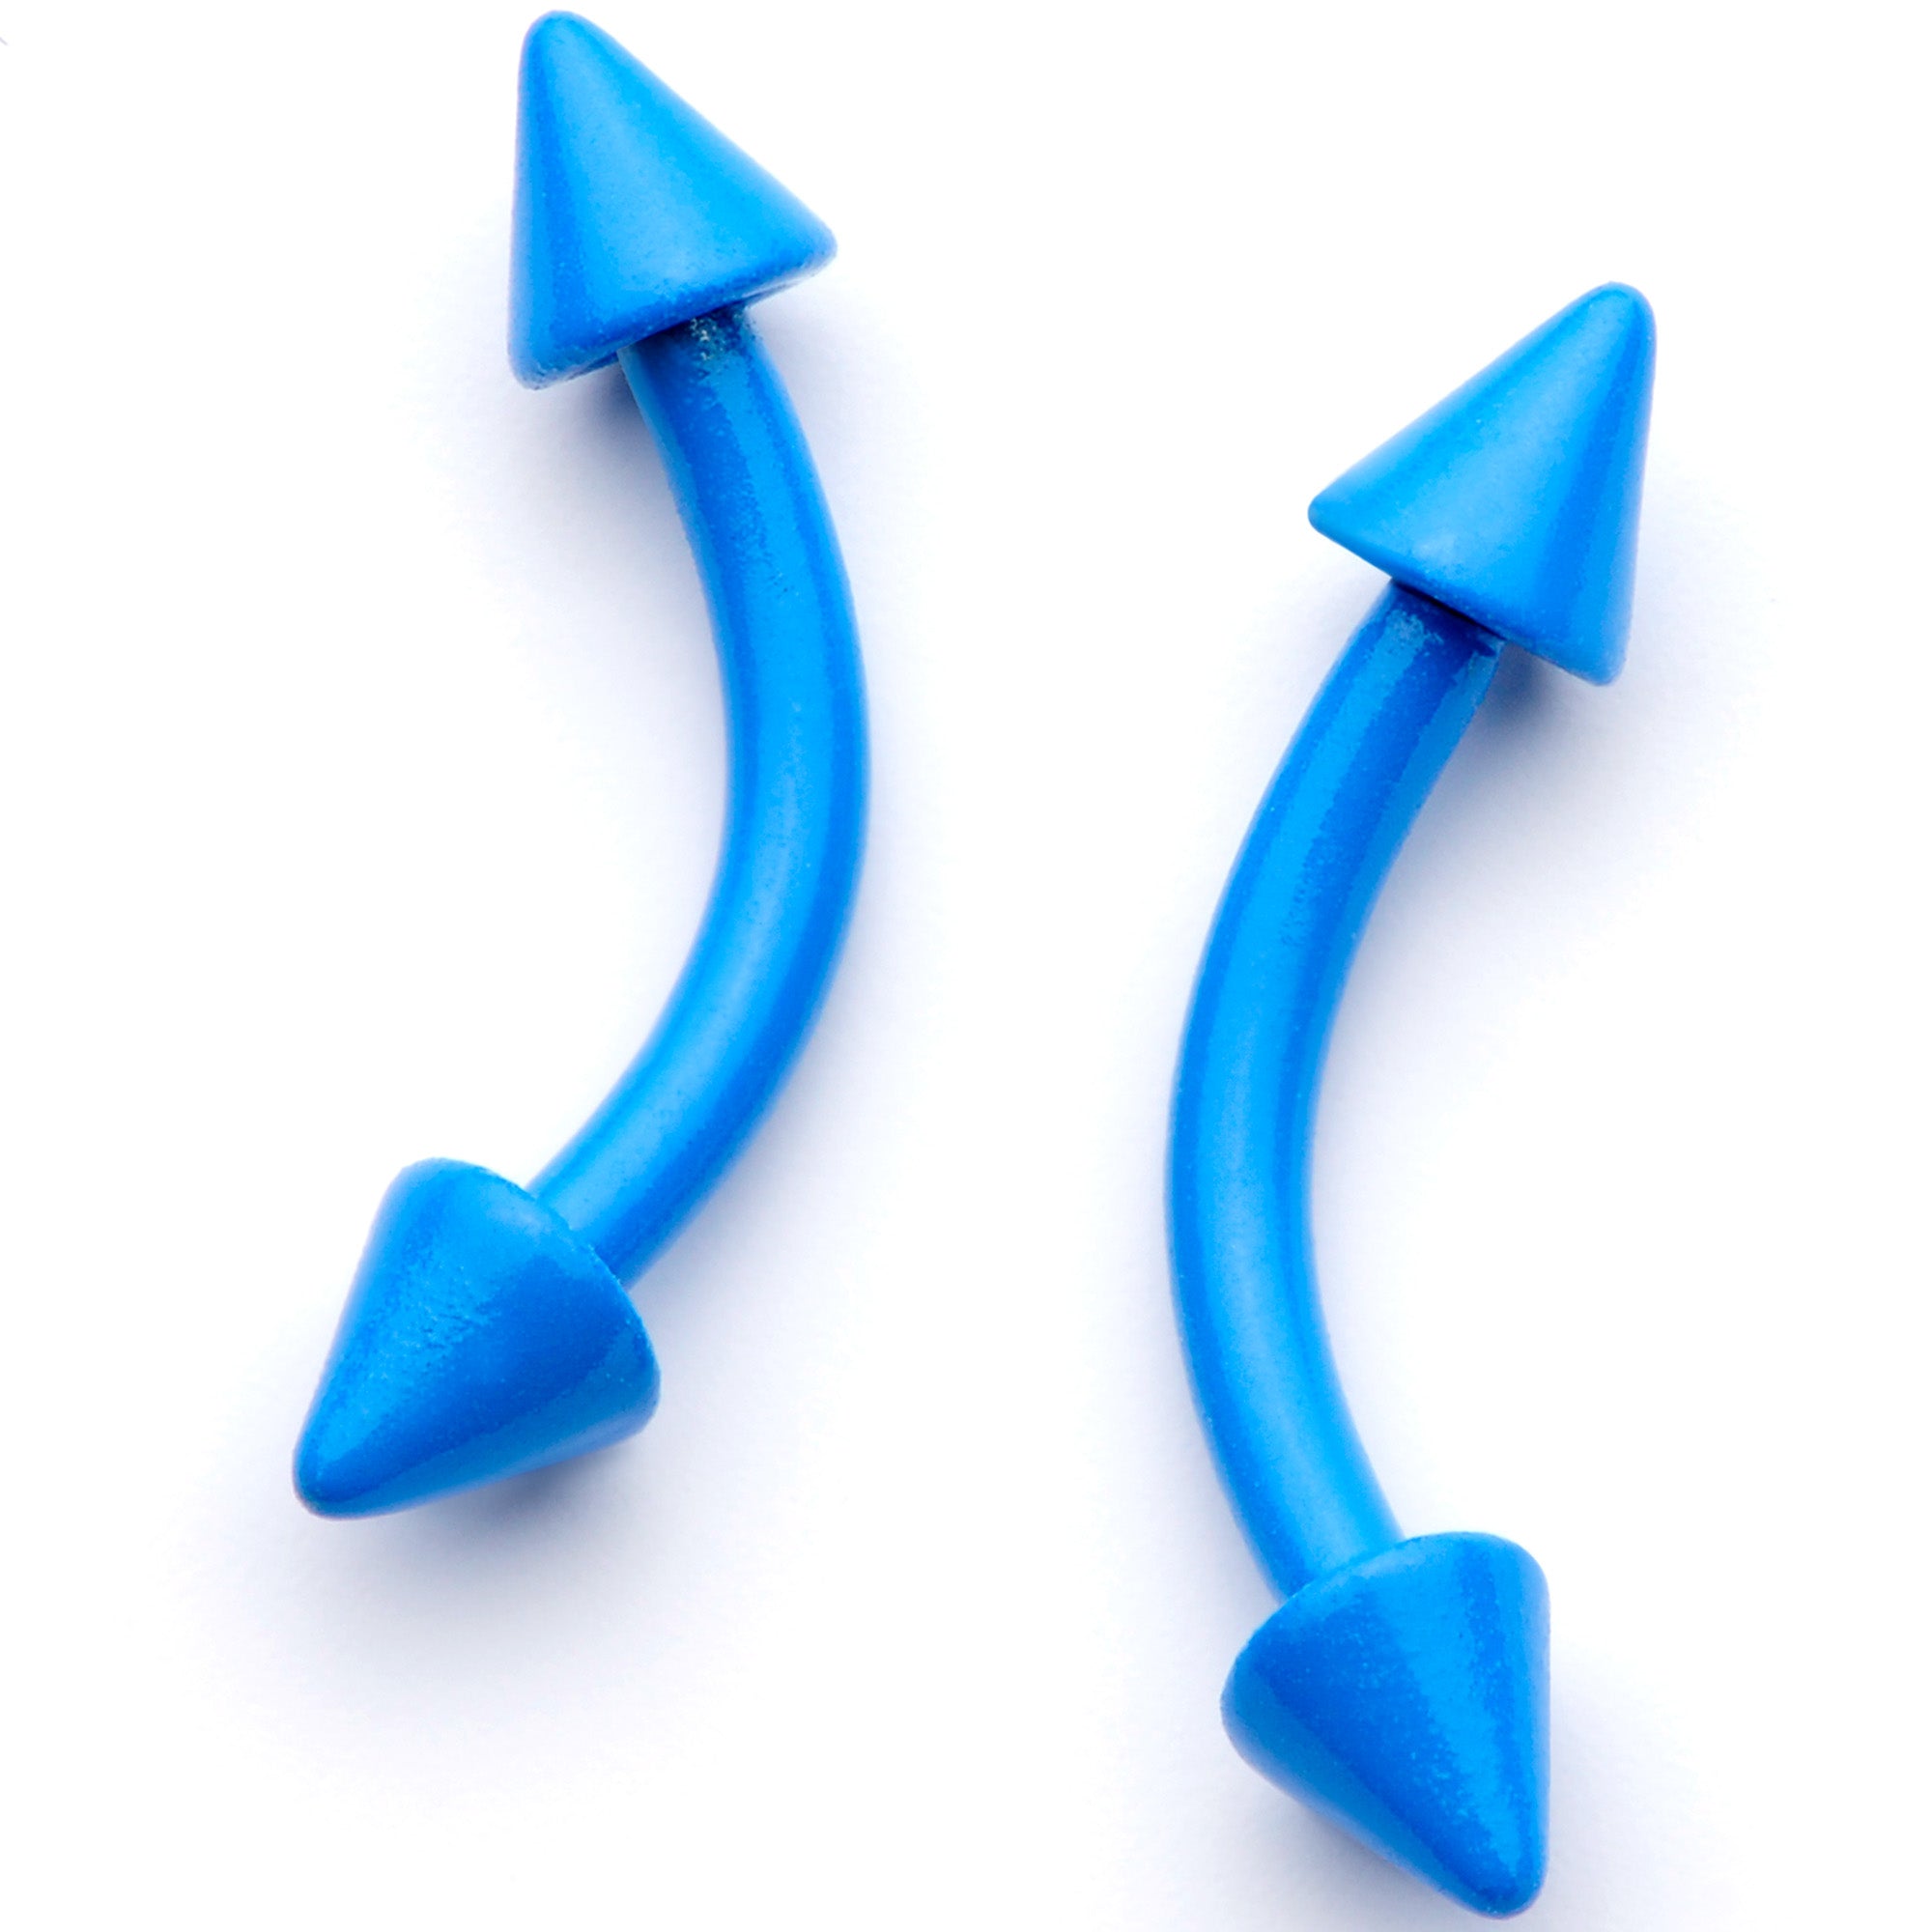 16 Gauge 5/16 Blue Glow in the Dark Cone End Curved Barbell Set of 2